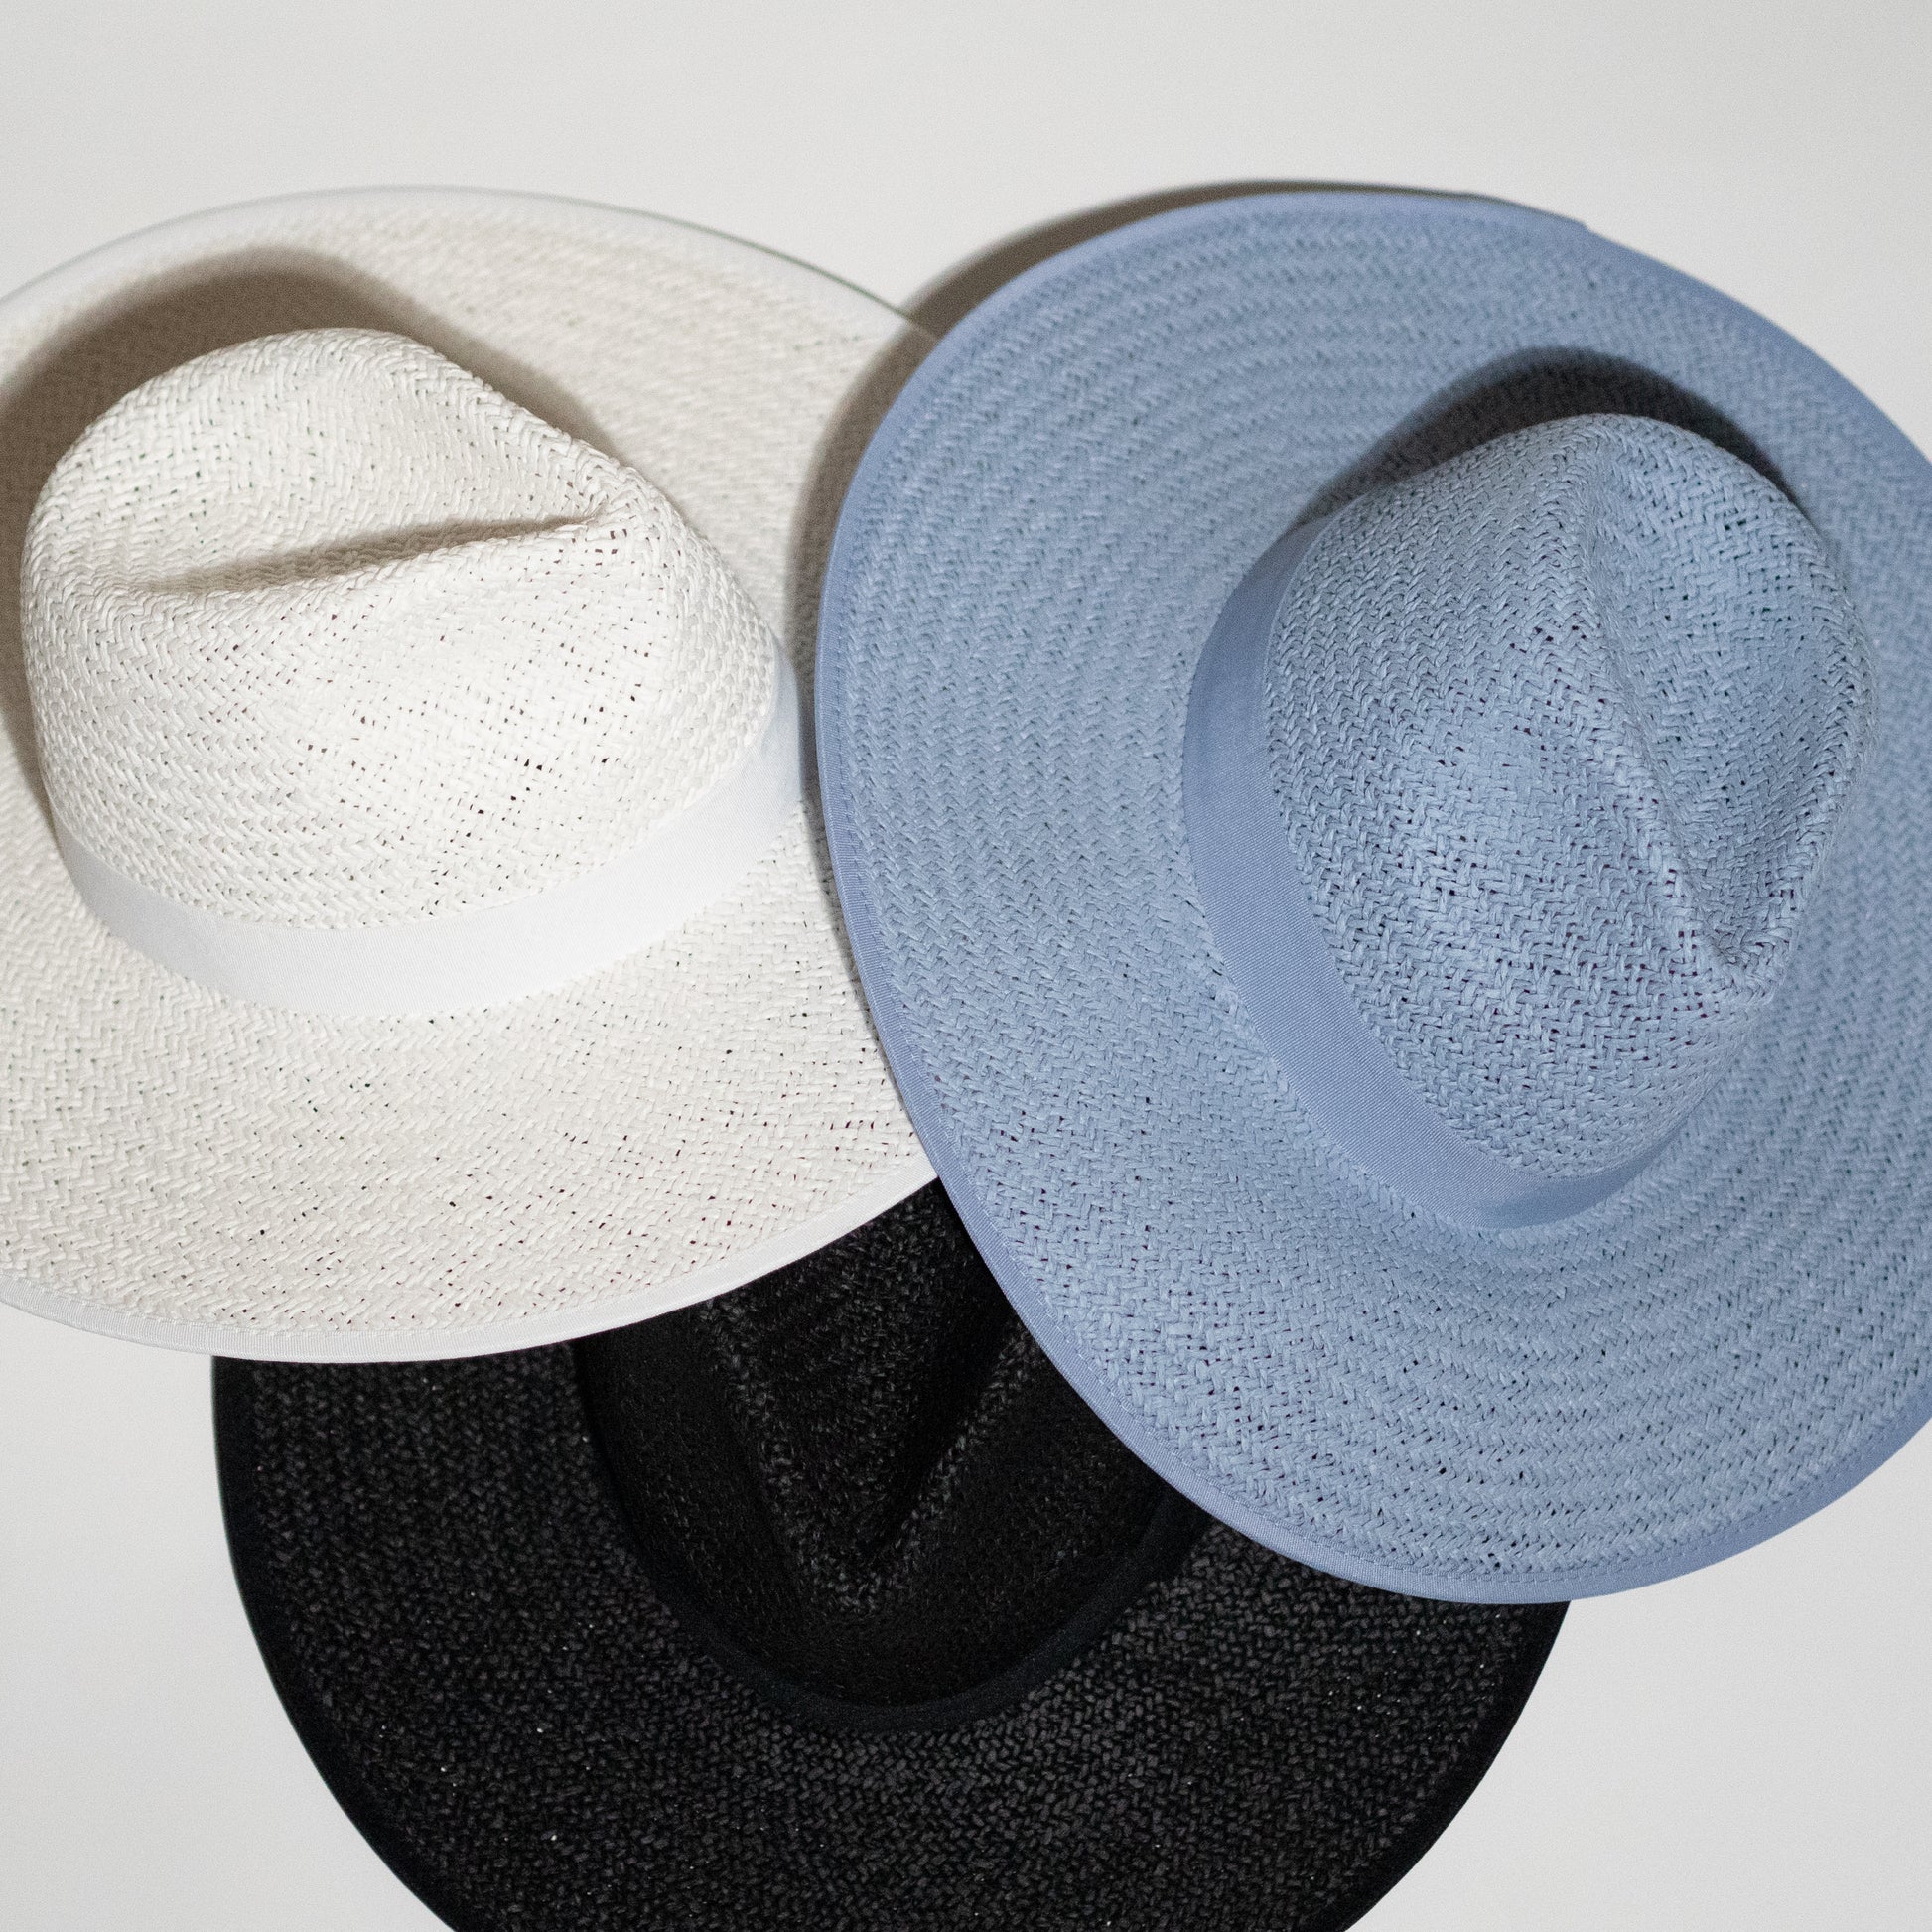 Wide Brim Straw Rancher Hats White Powder Blue and Black Circumference 16 inches Blaze and Sparkles